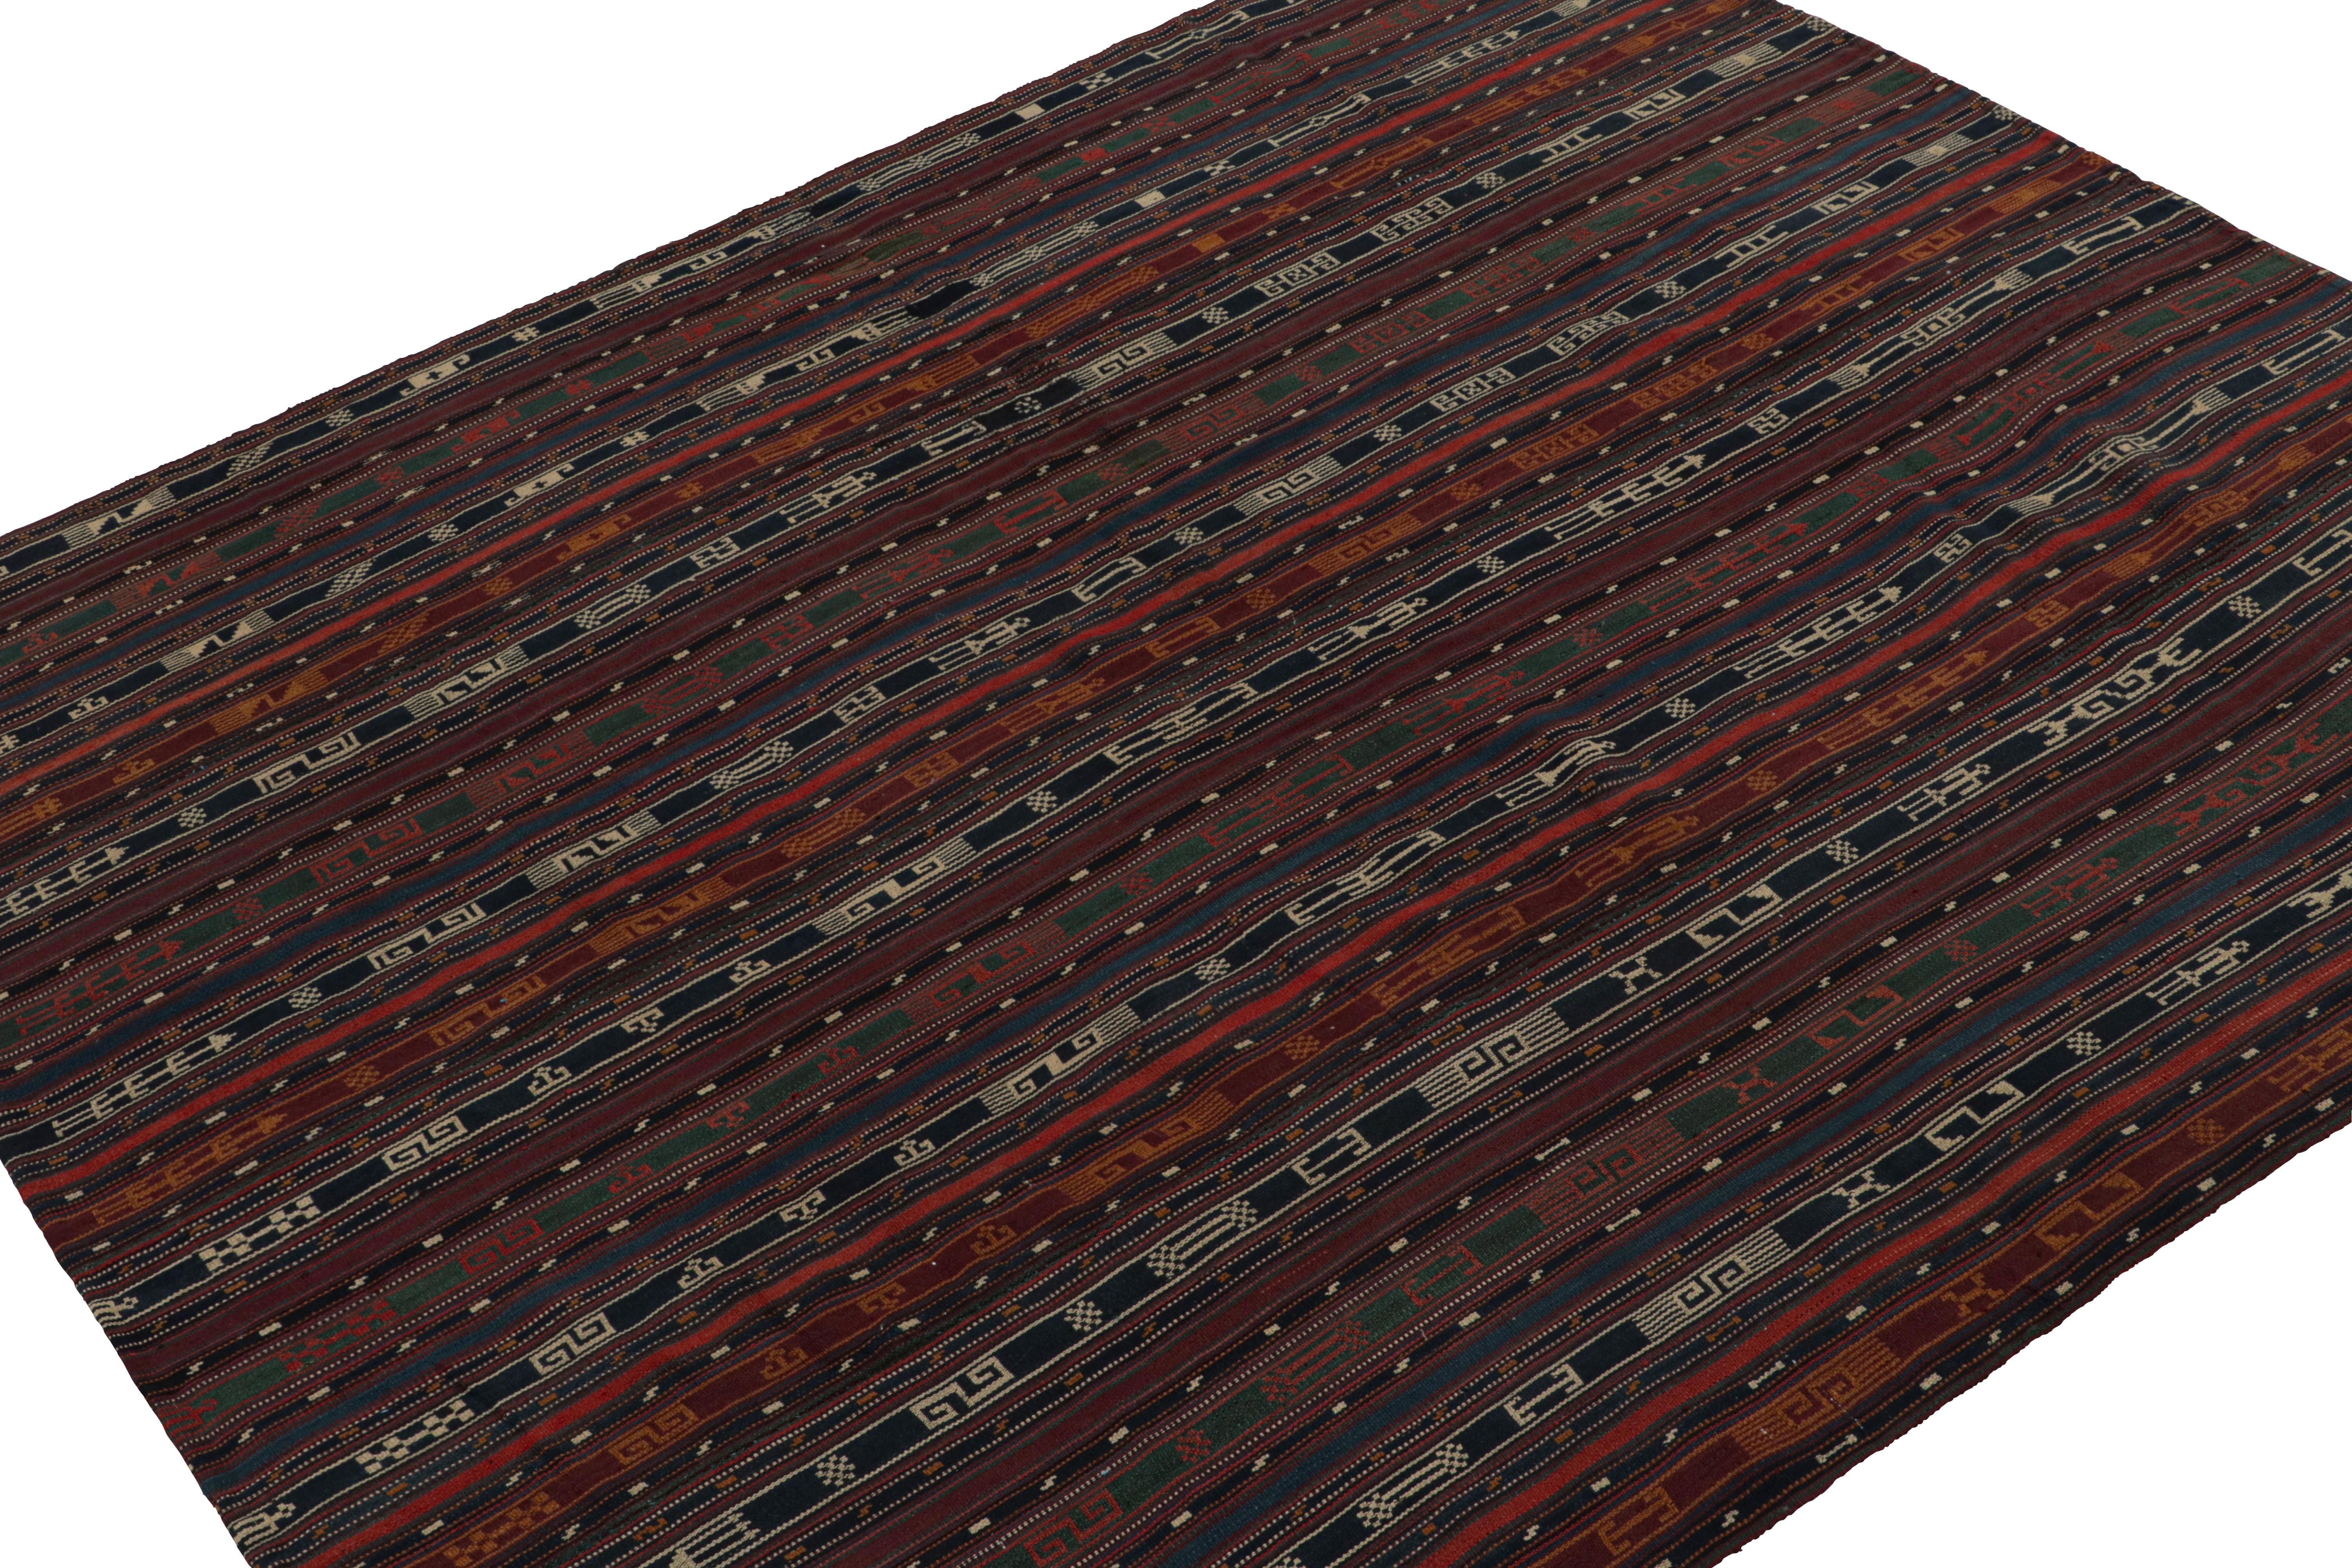 Handmade in wool, circa 1950-1960, this 5x6 vintage Shahsavan tribal Persian Kilim rug, features geometric stripes across the field. 

On the Design: 

Keen eyes for detail will admire the repetitive vertical striped pattern of this rug. Striped